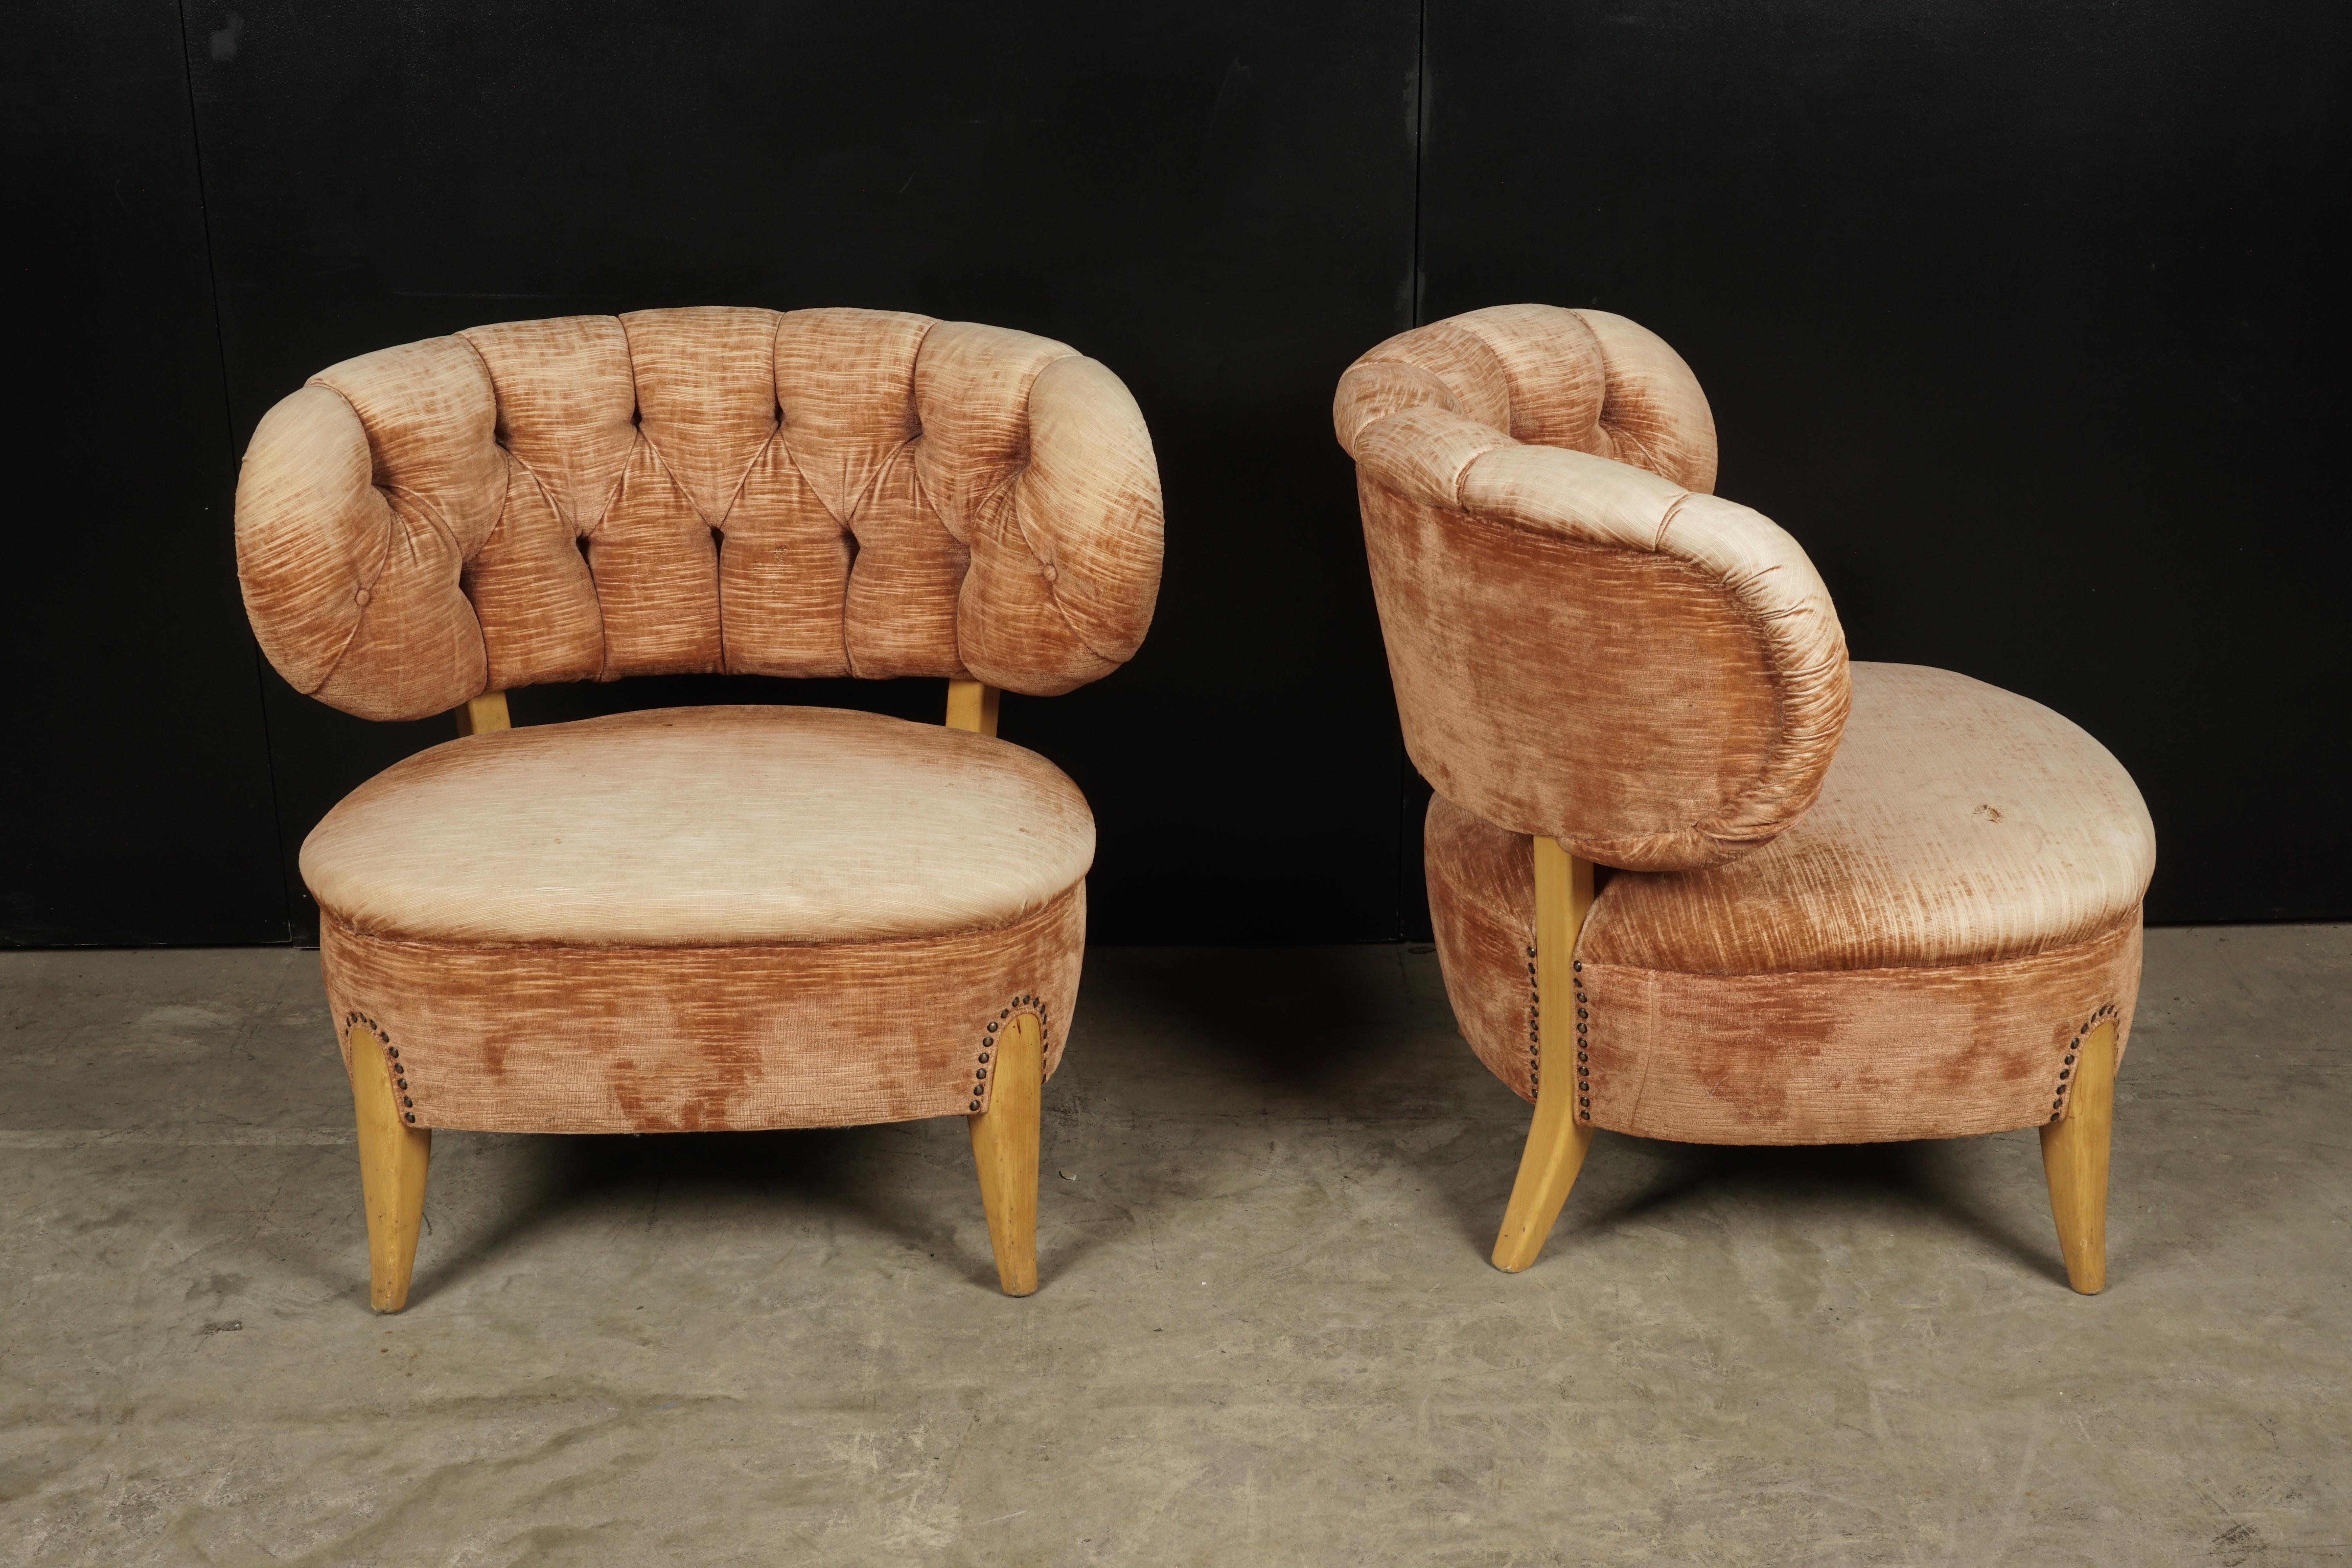 Rare pair of midcentury lounge chairs designed by Otto Shultz, circa 1950. Original upholstery with birch legs. Manufactured by Boet, Sweden.